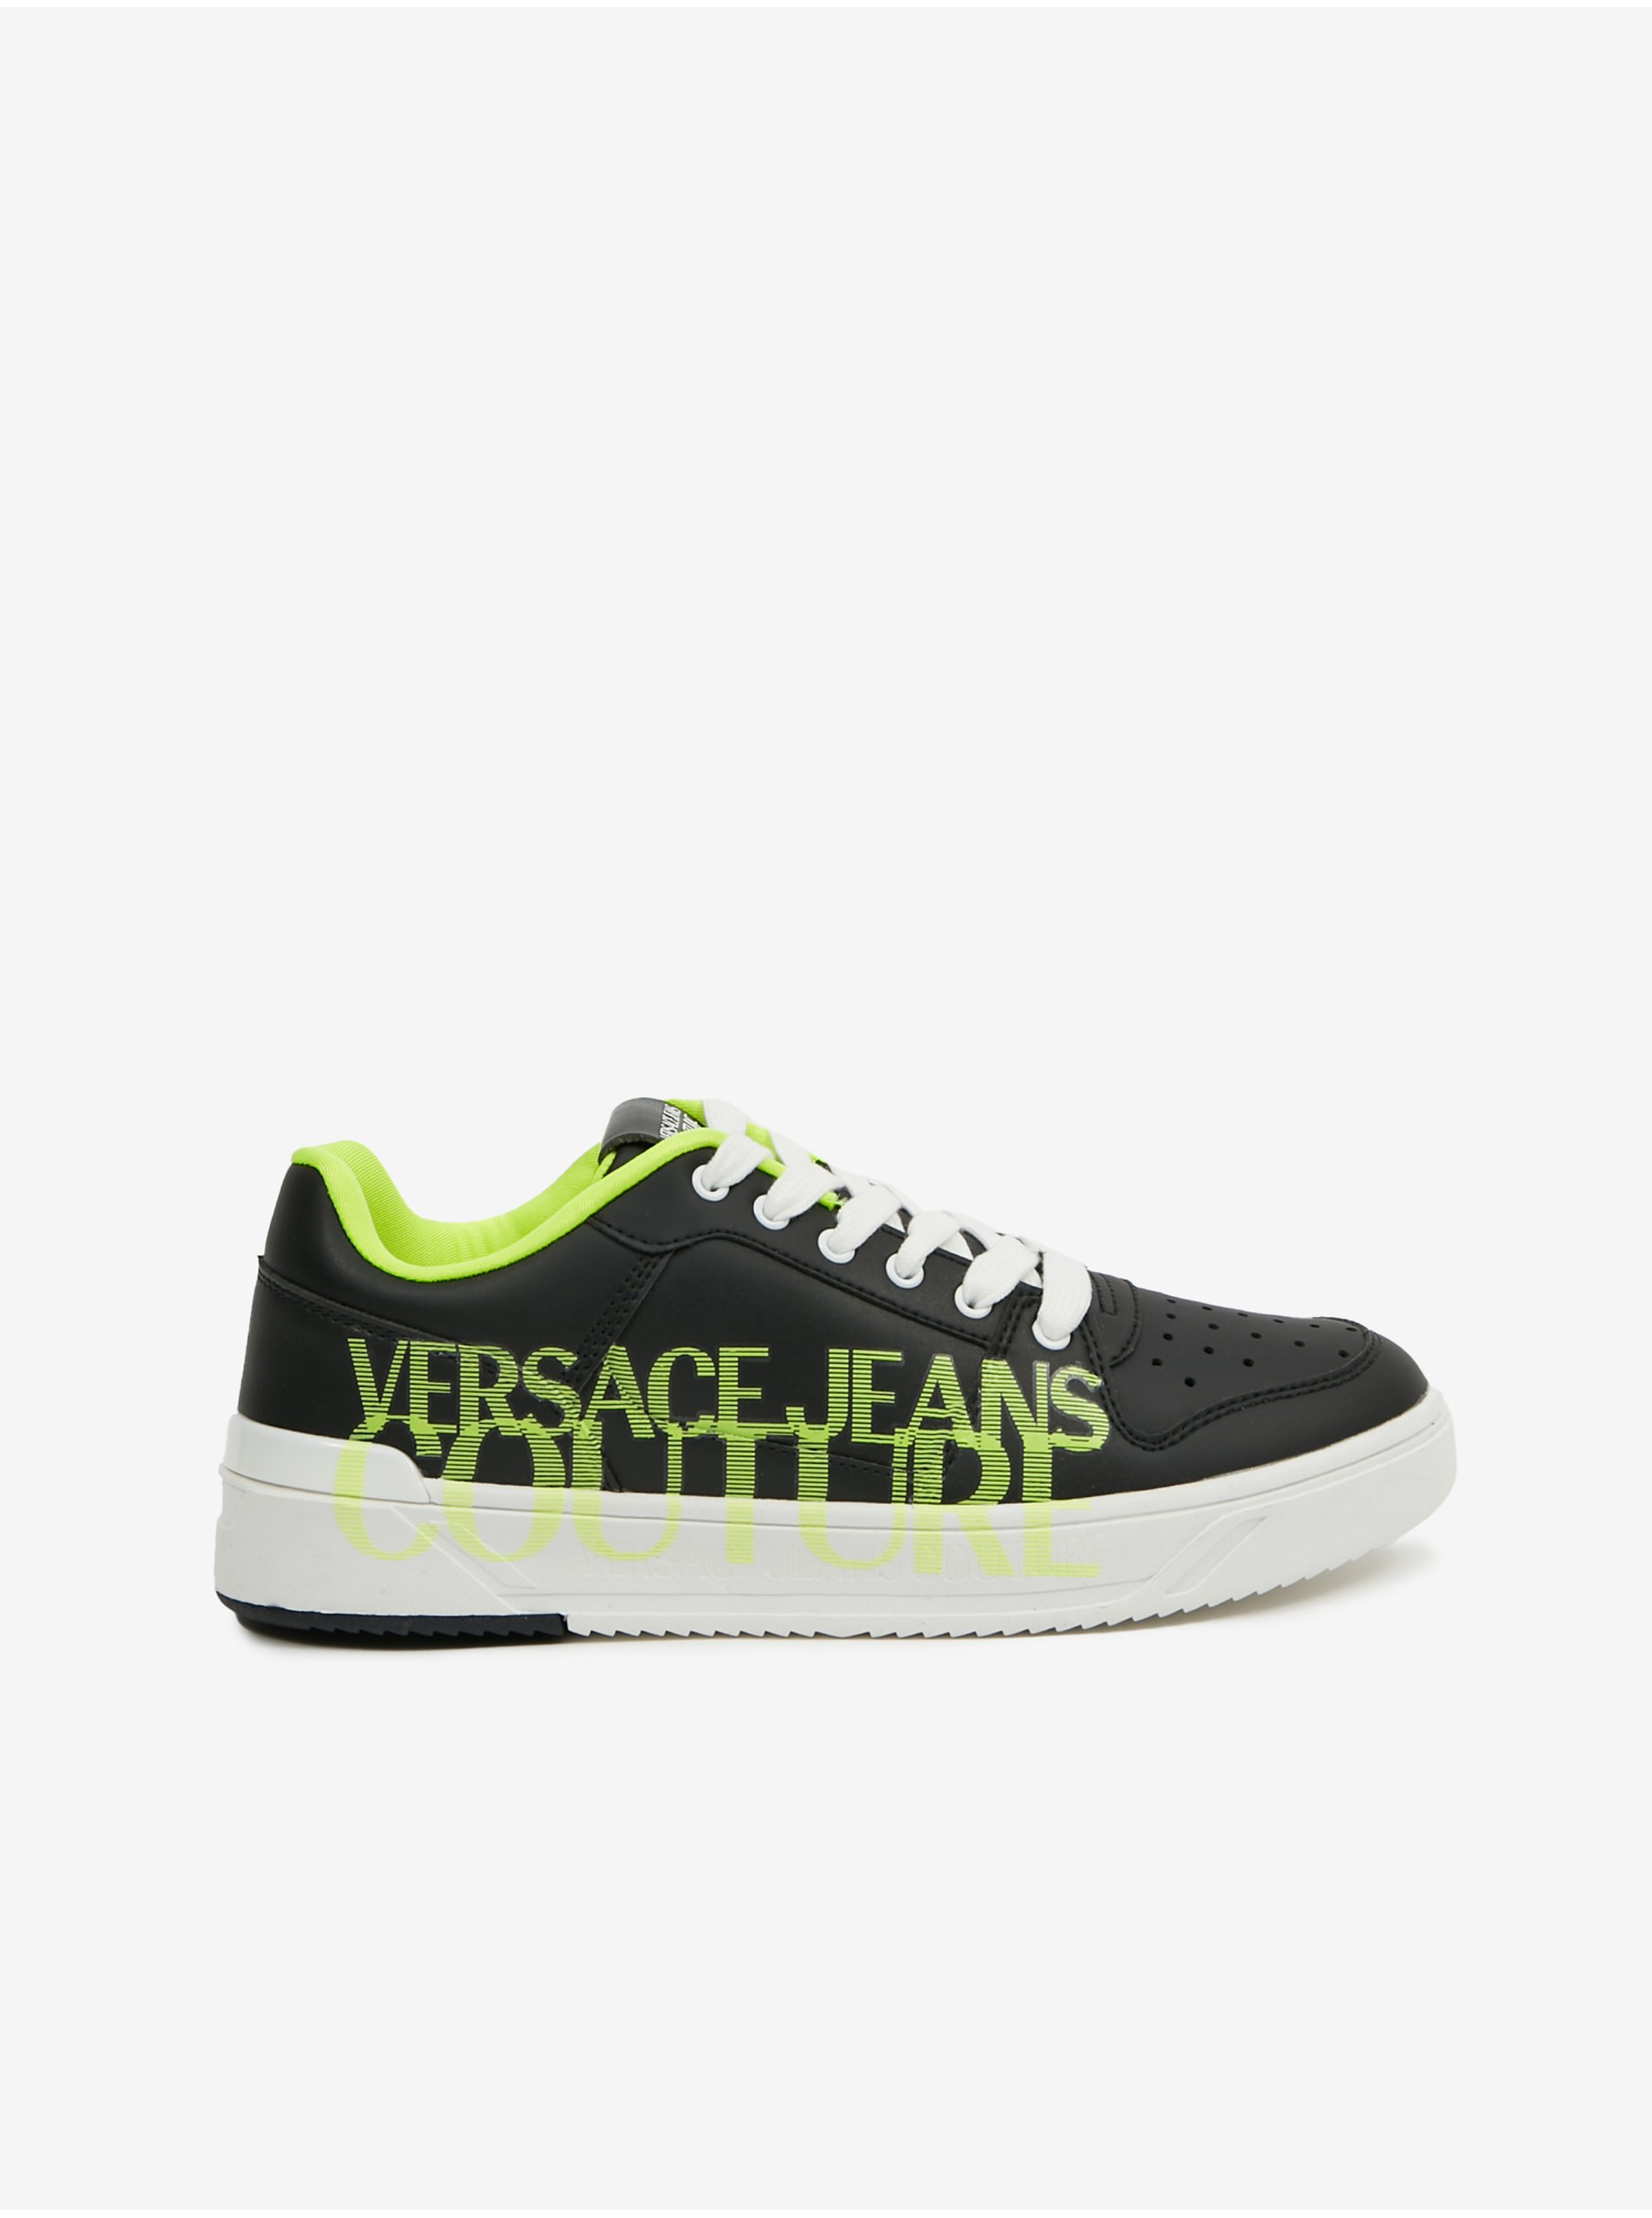 Green-black Men's Leather Sneakers Versace Jeans Couture - Men